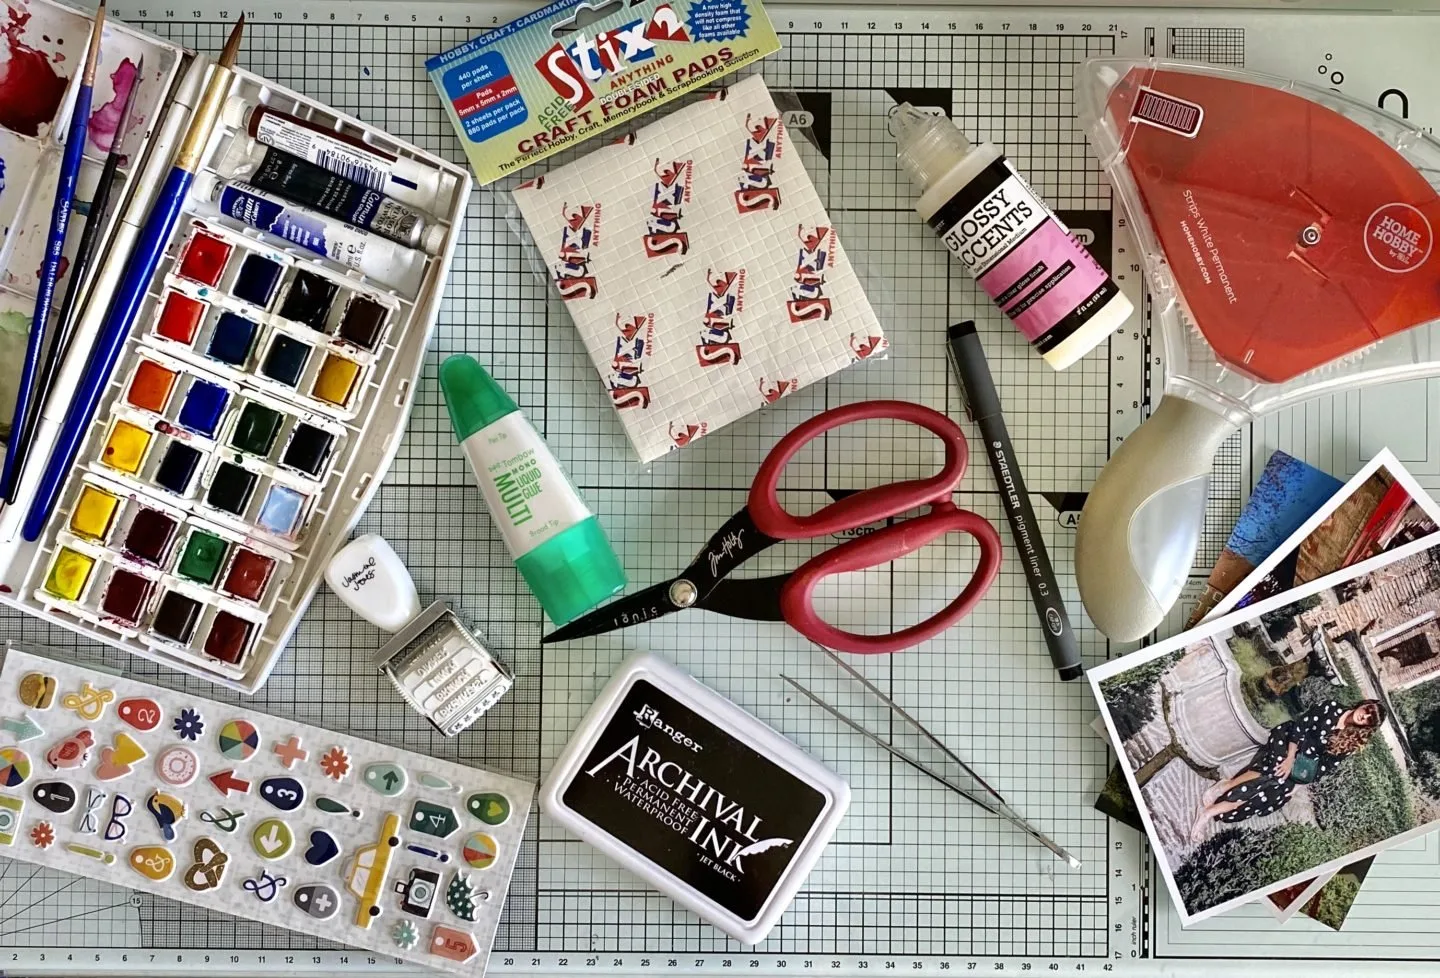 Scrapbooking tools and essentials, including glue and tape, How to scrapbook